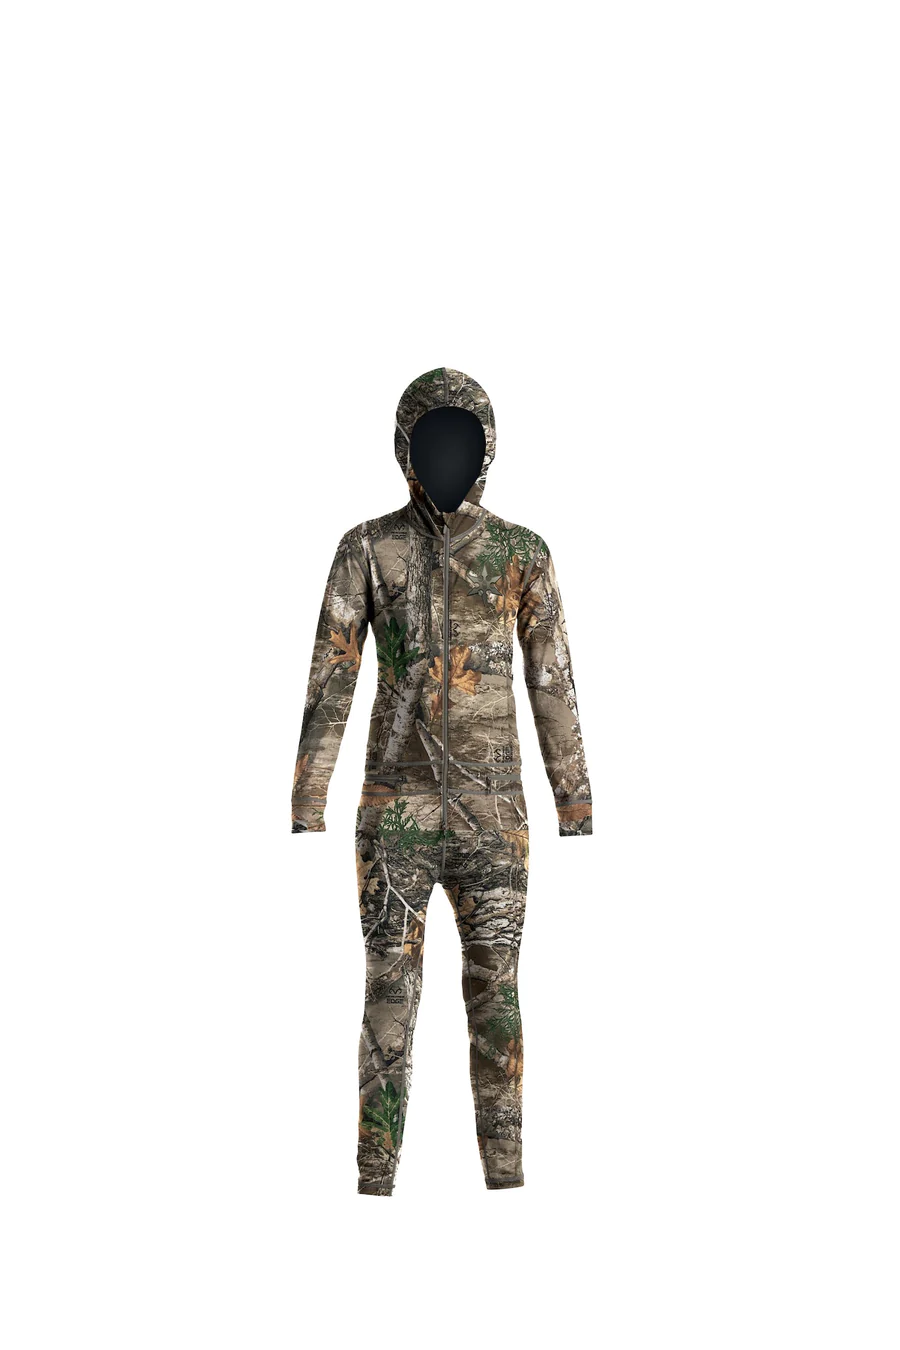 Airblaster Men's Classic Ninja Suit - Outtabounds